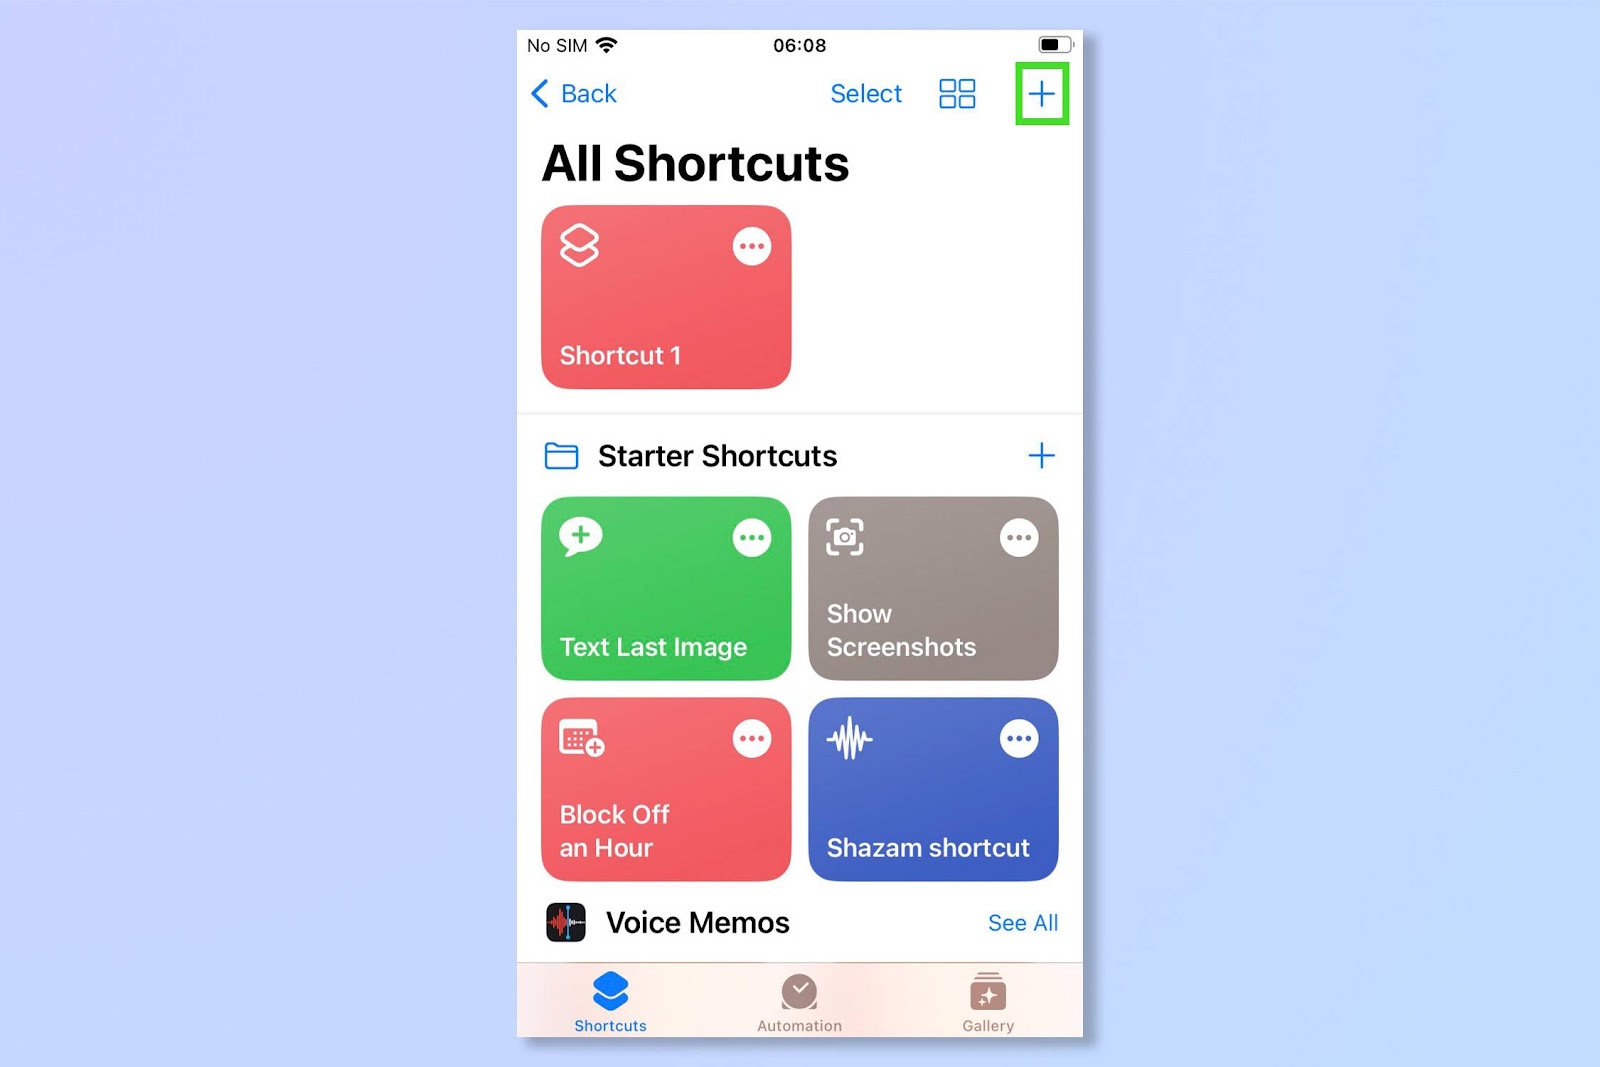 The second step to using overlay images on iPhone, the shortcuts screen